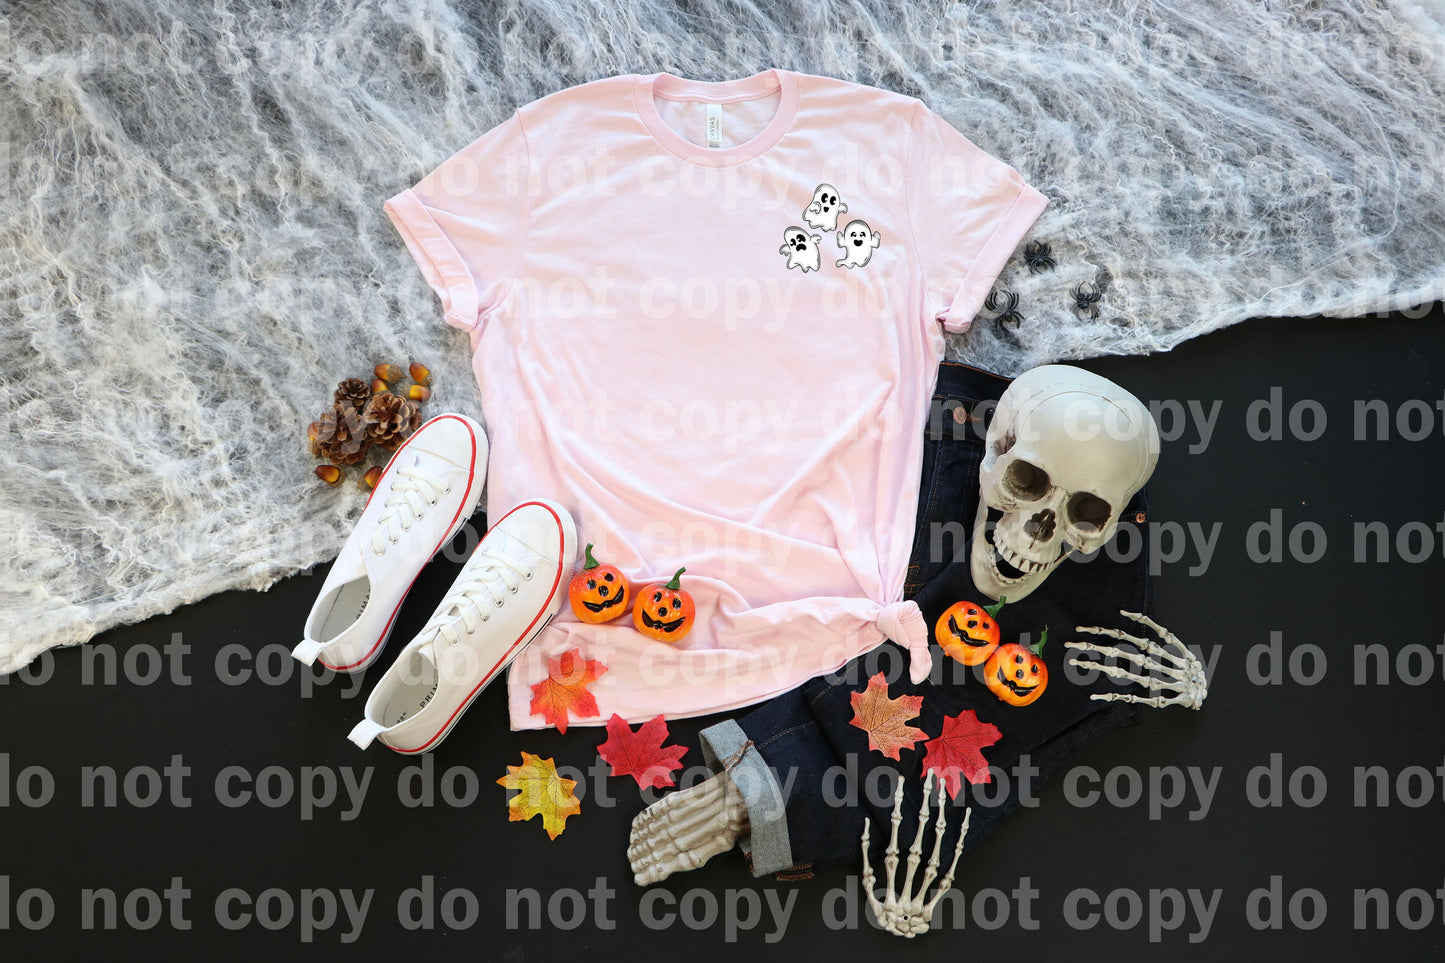 Ghost Stories Tan Brown Black with Pocket Option Dream Print or Sublimation Print